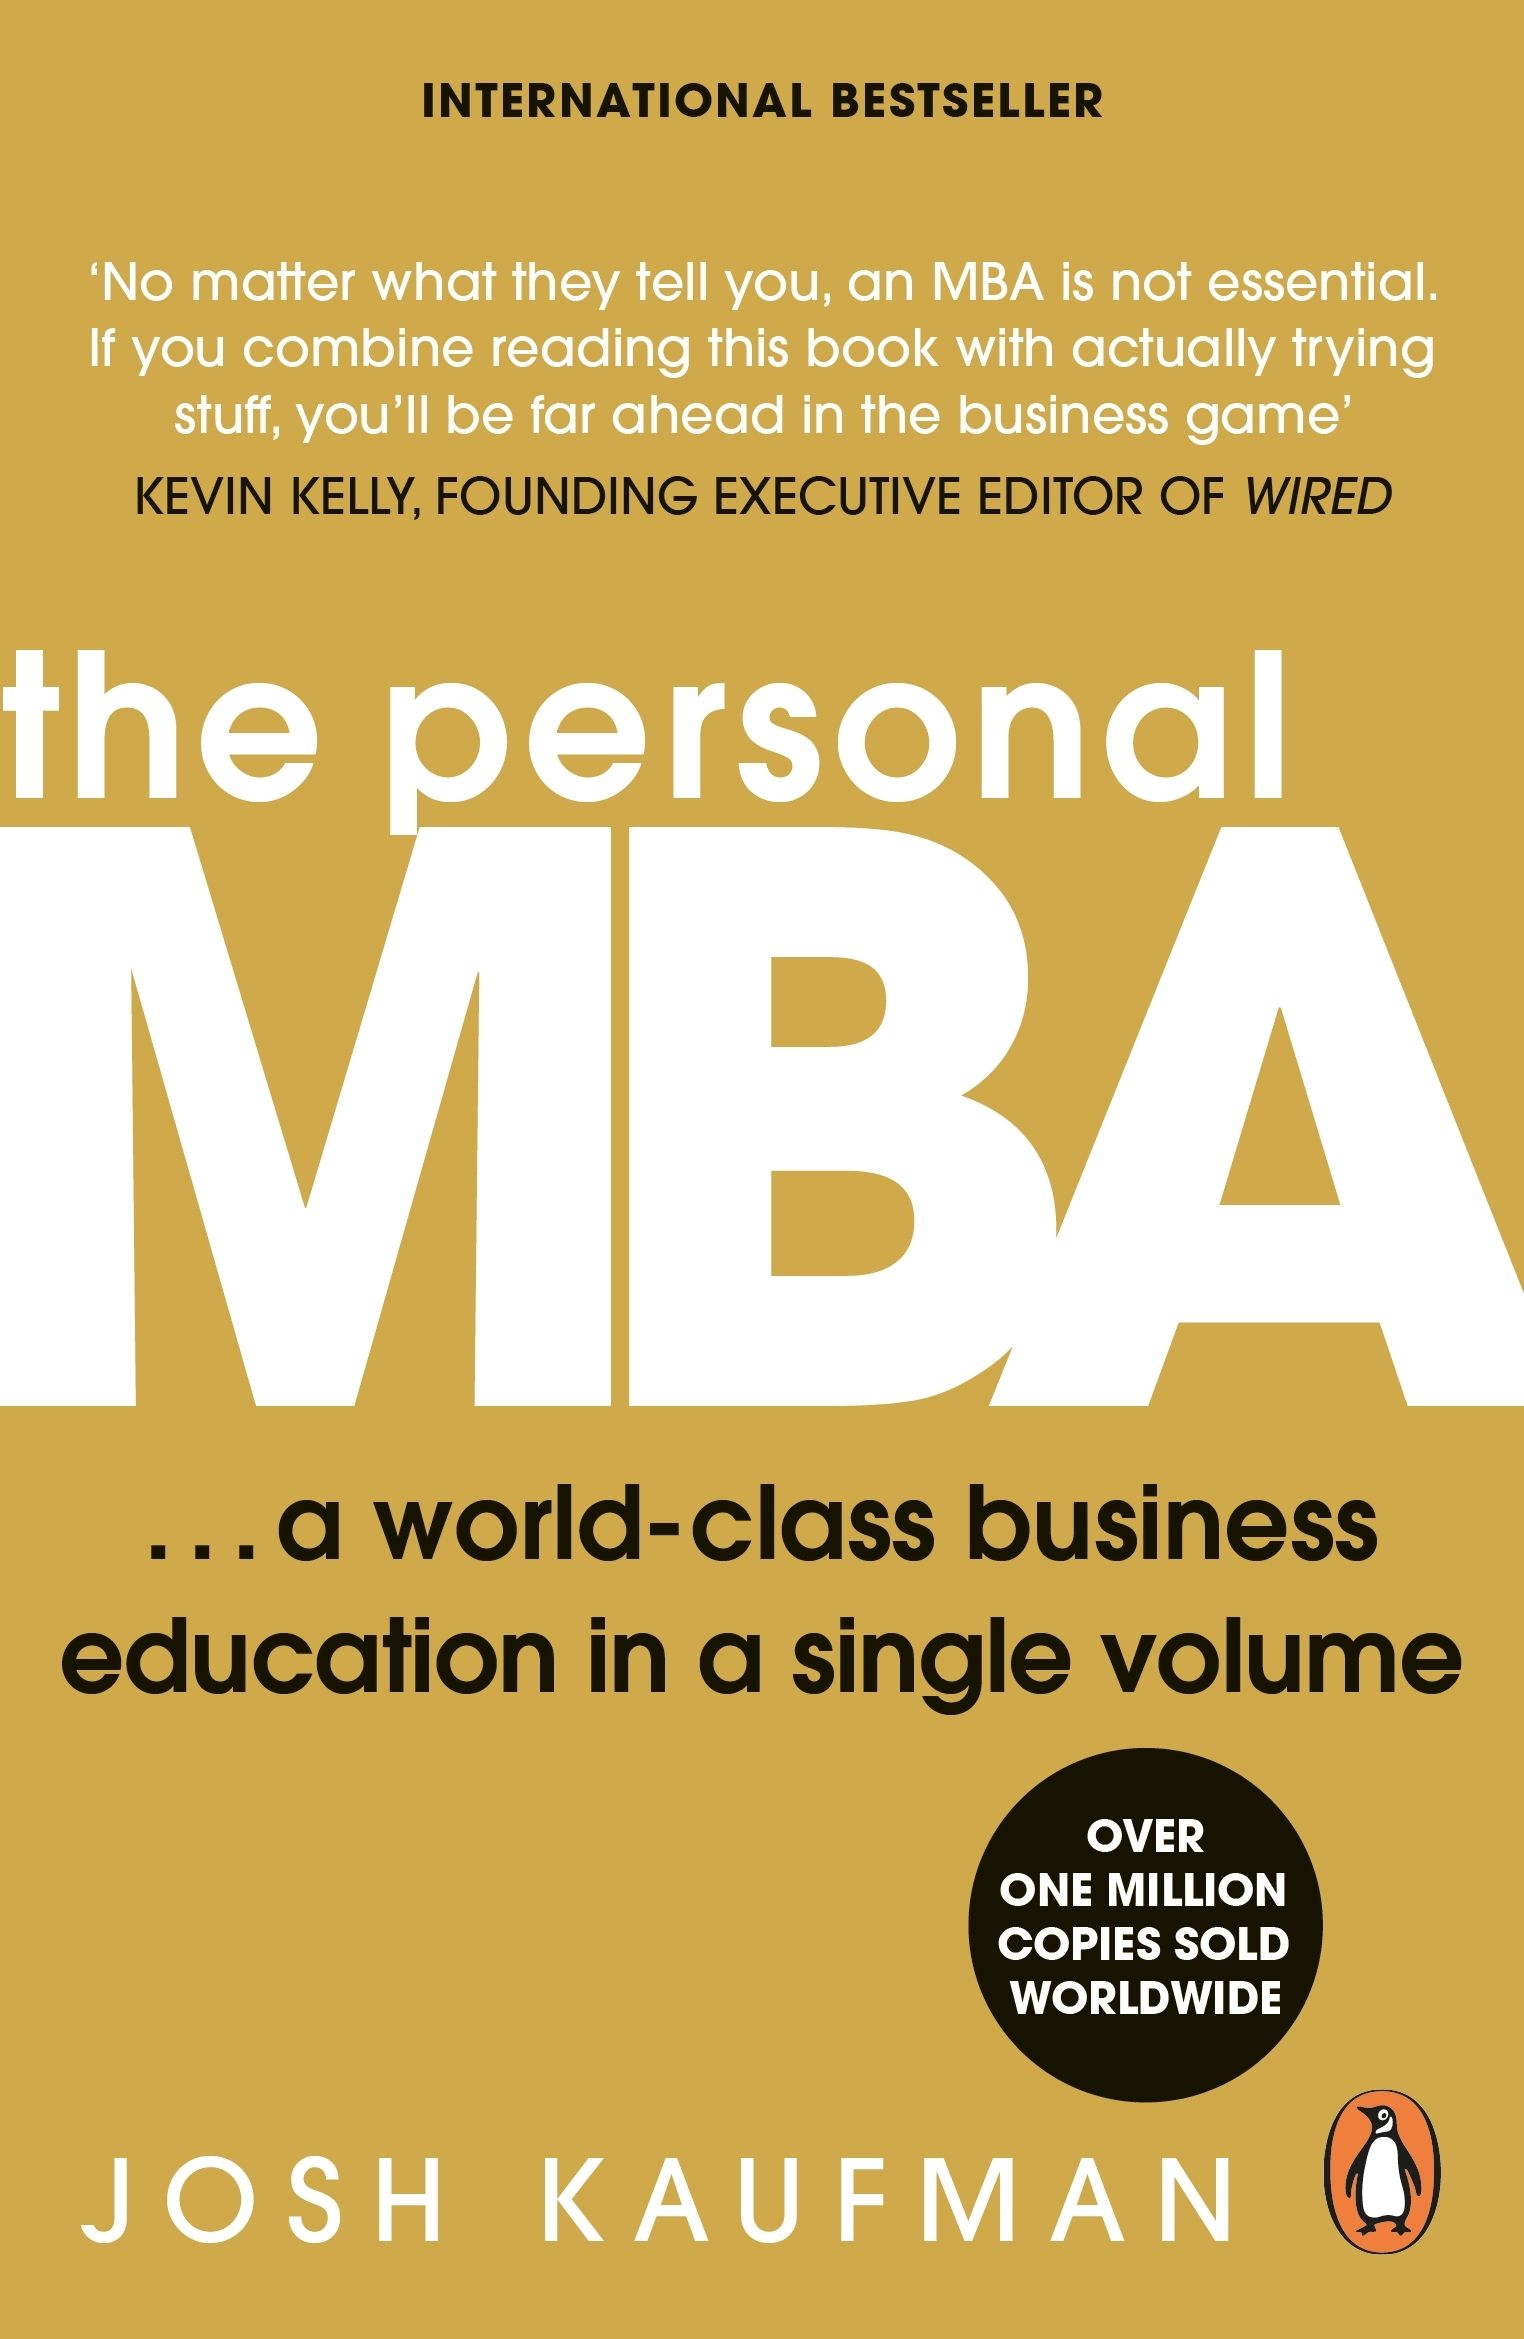 Summary of Marketing Section from The Personal MBA